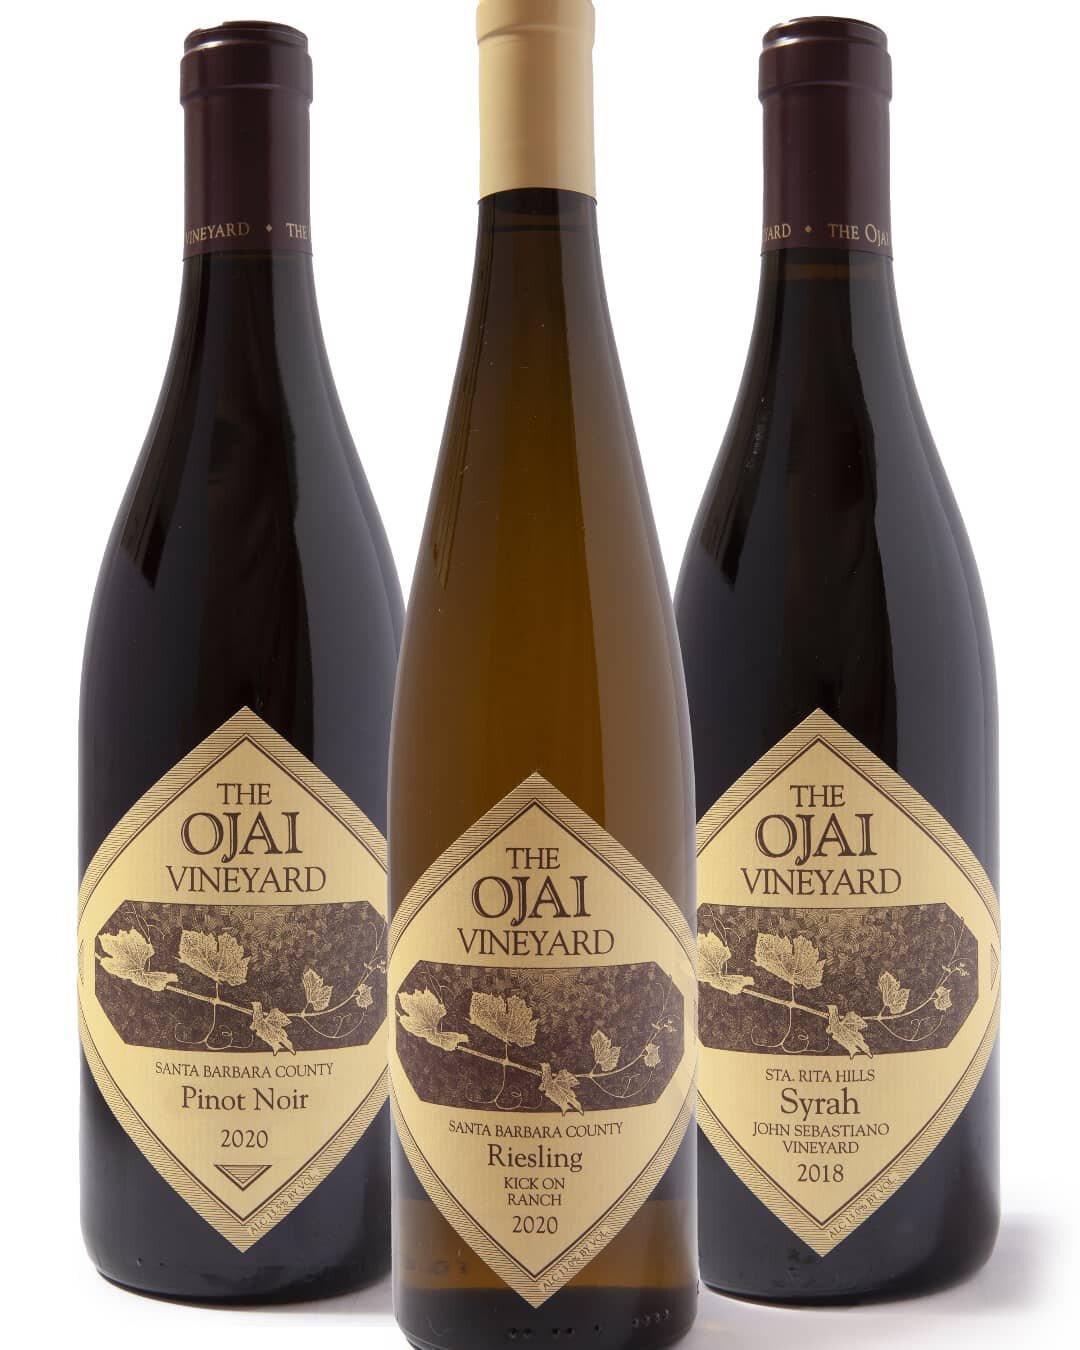 Introducing....The Ojai Case!

Three bottles, to literally set your Christmas table on fire this year. Including...

Riesling Kick On Ranch 2020 - 91pts
Zesty and dry,, tropical fruit laden beauty, perfect for aperitif.

Pinot Noir Santa Barbara Coun